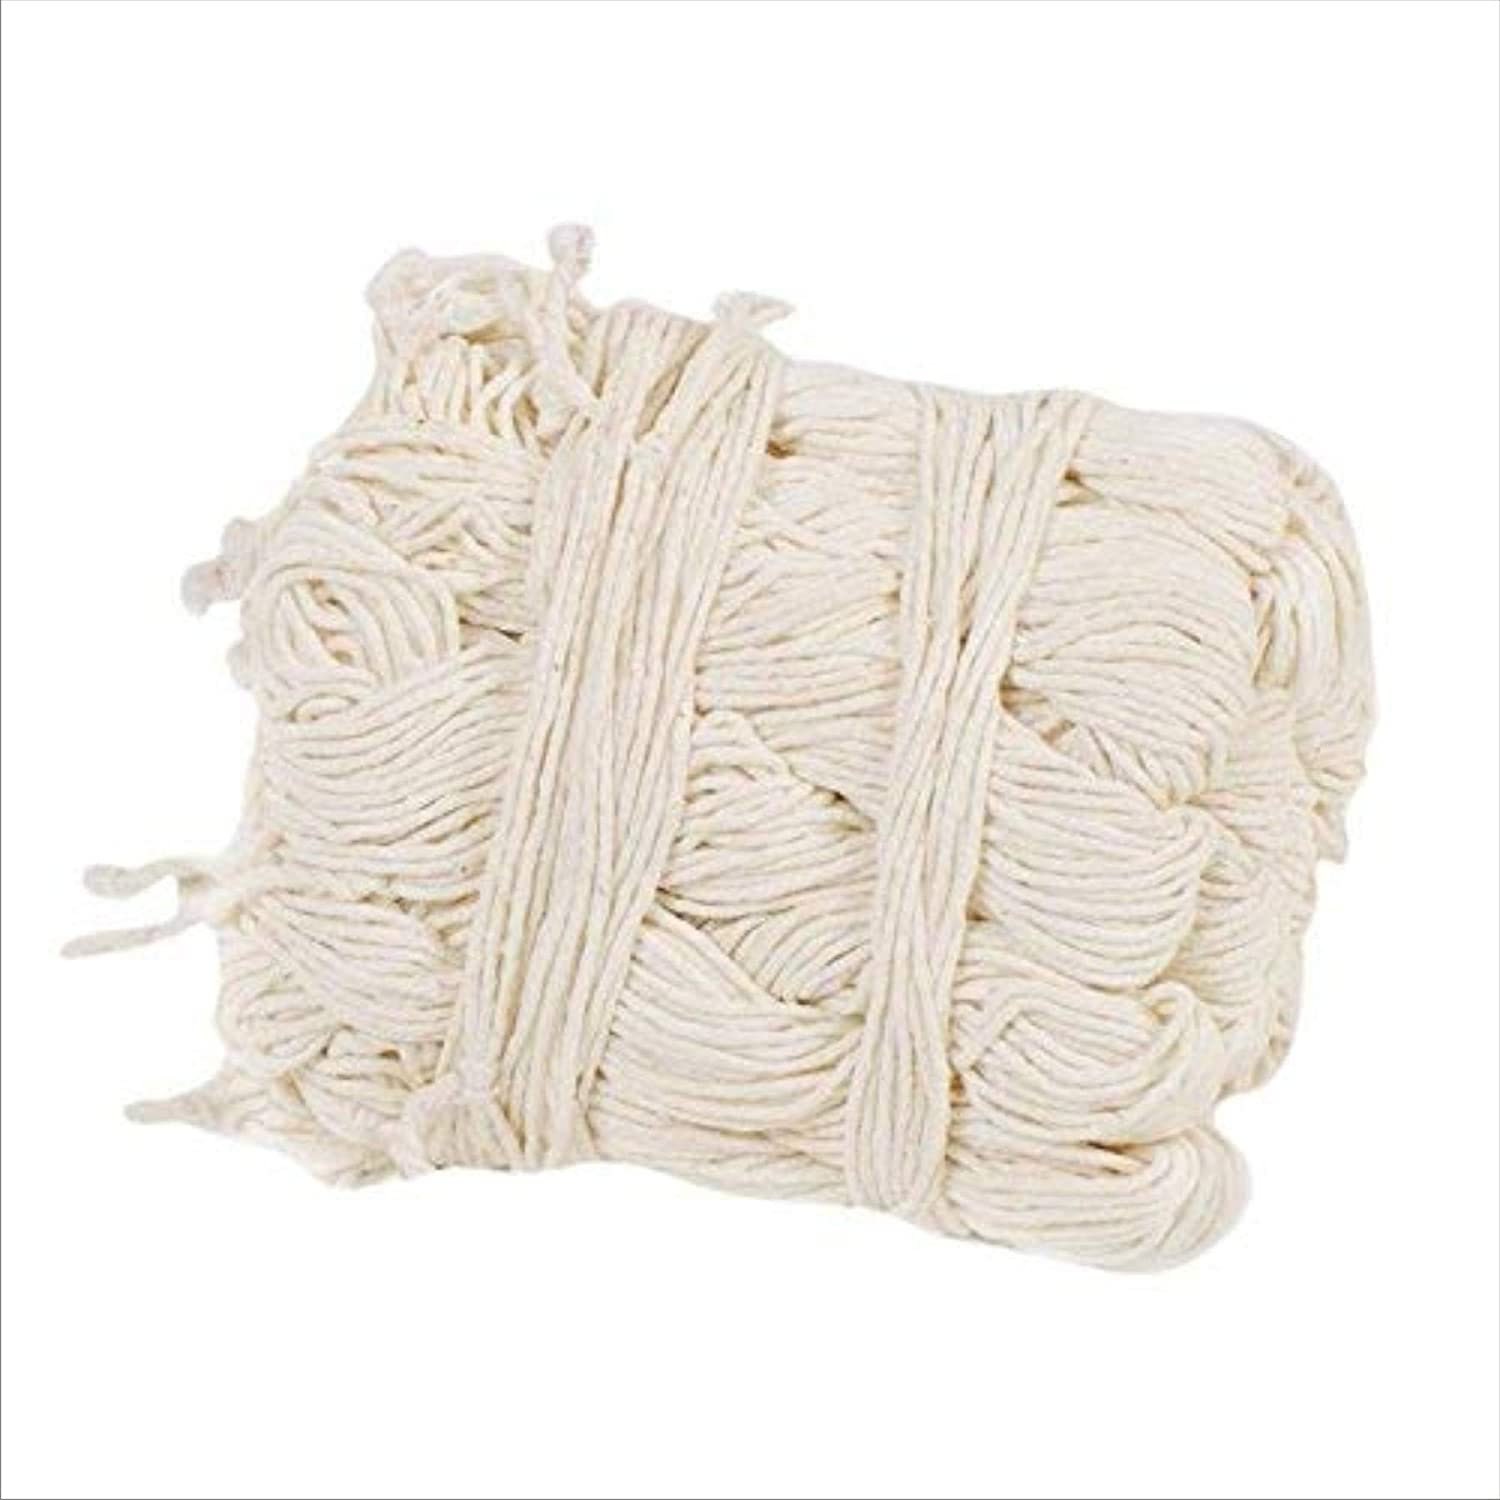 Thick Cotton Yarn for Knitting, Crochet, Crafts, DIY Projects. Nm5